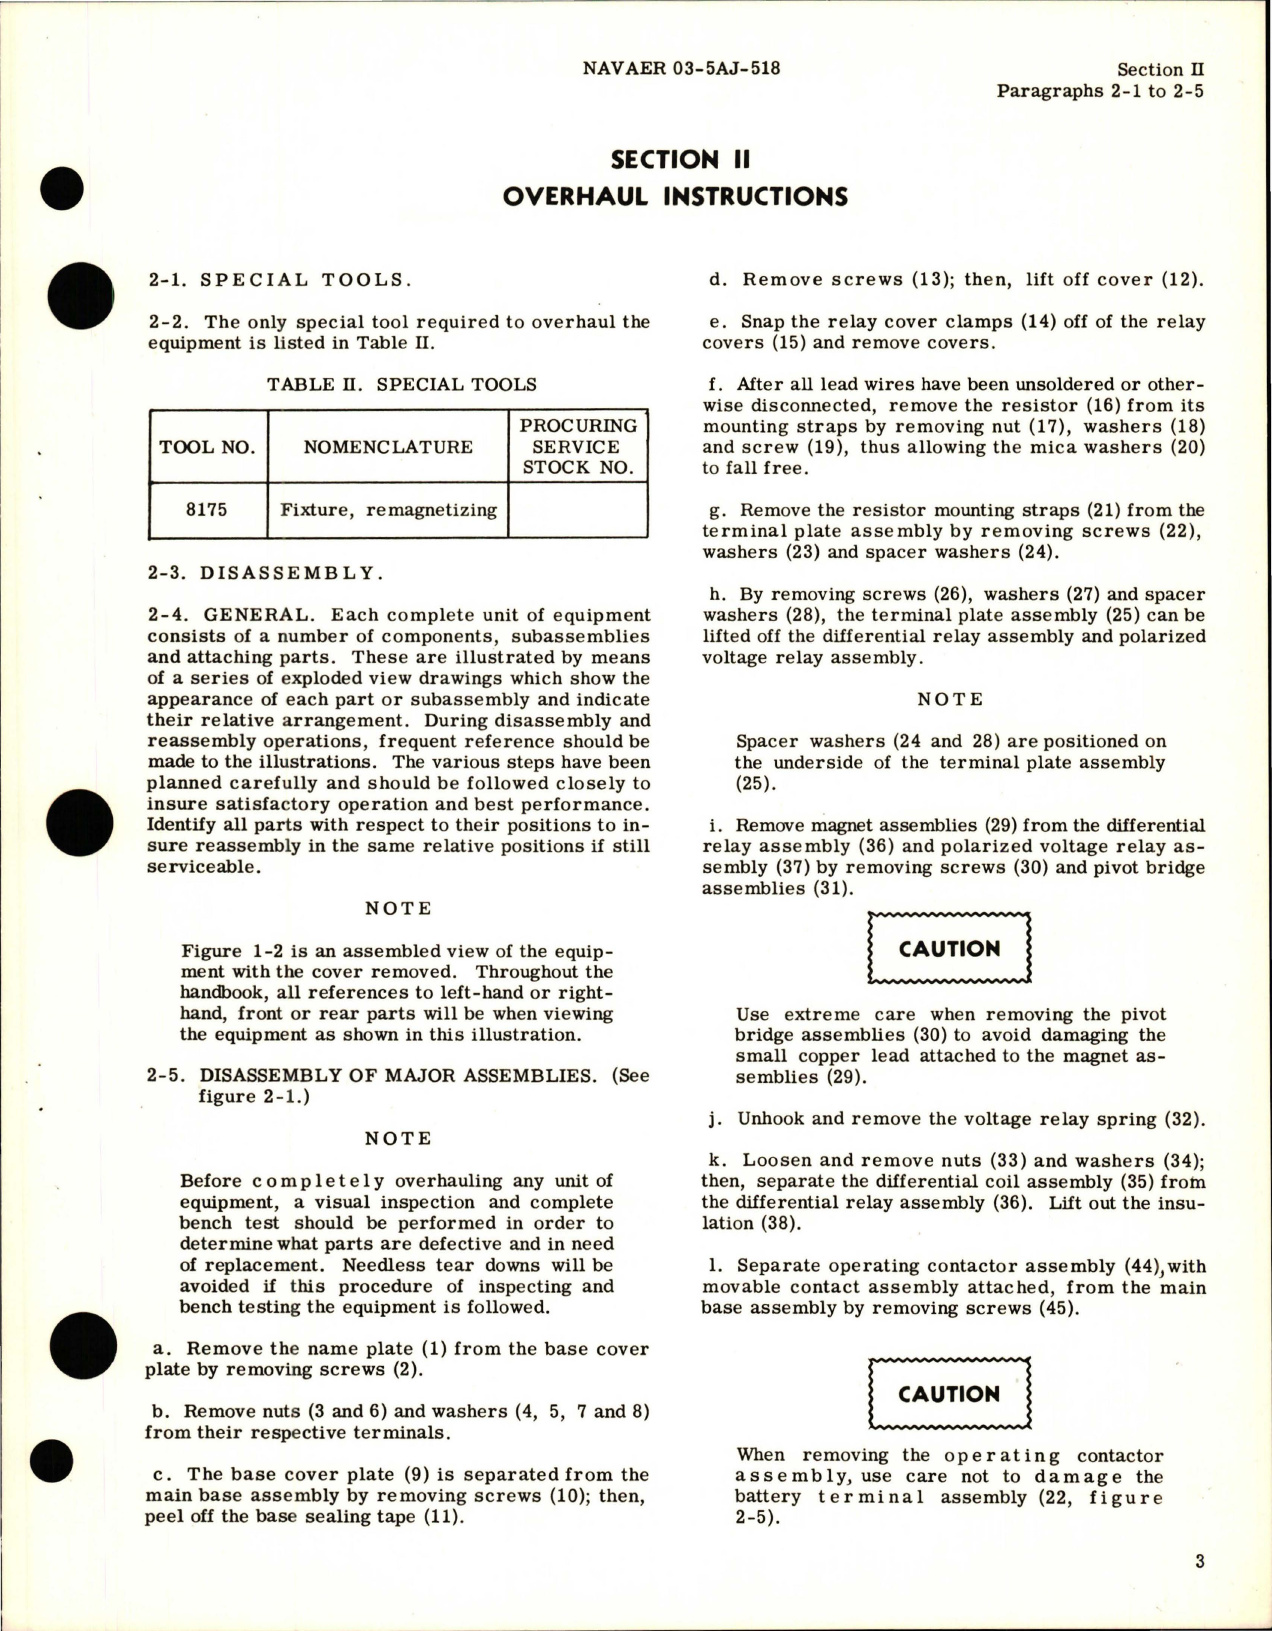 Sample page 7 from AirCorps Library document: Overhaul Instructions for 24 Volt DC System Reverse Current Cutout - Model AN3025-600  - Part A-702AP 